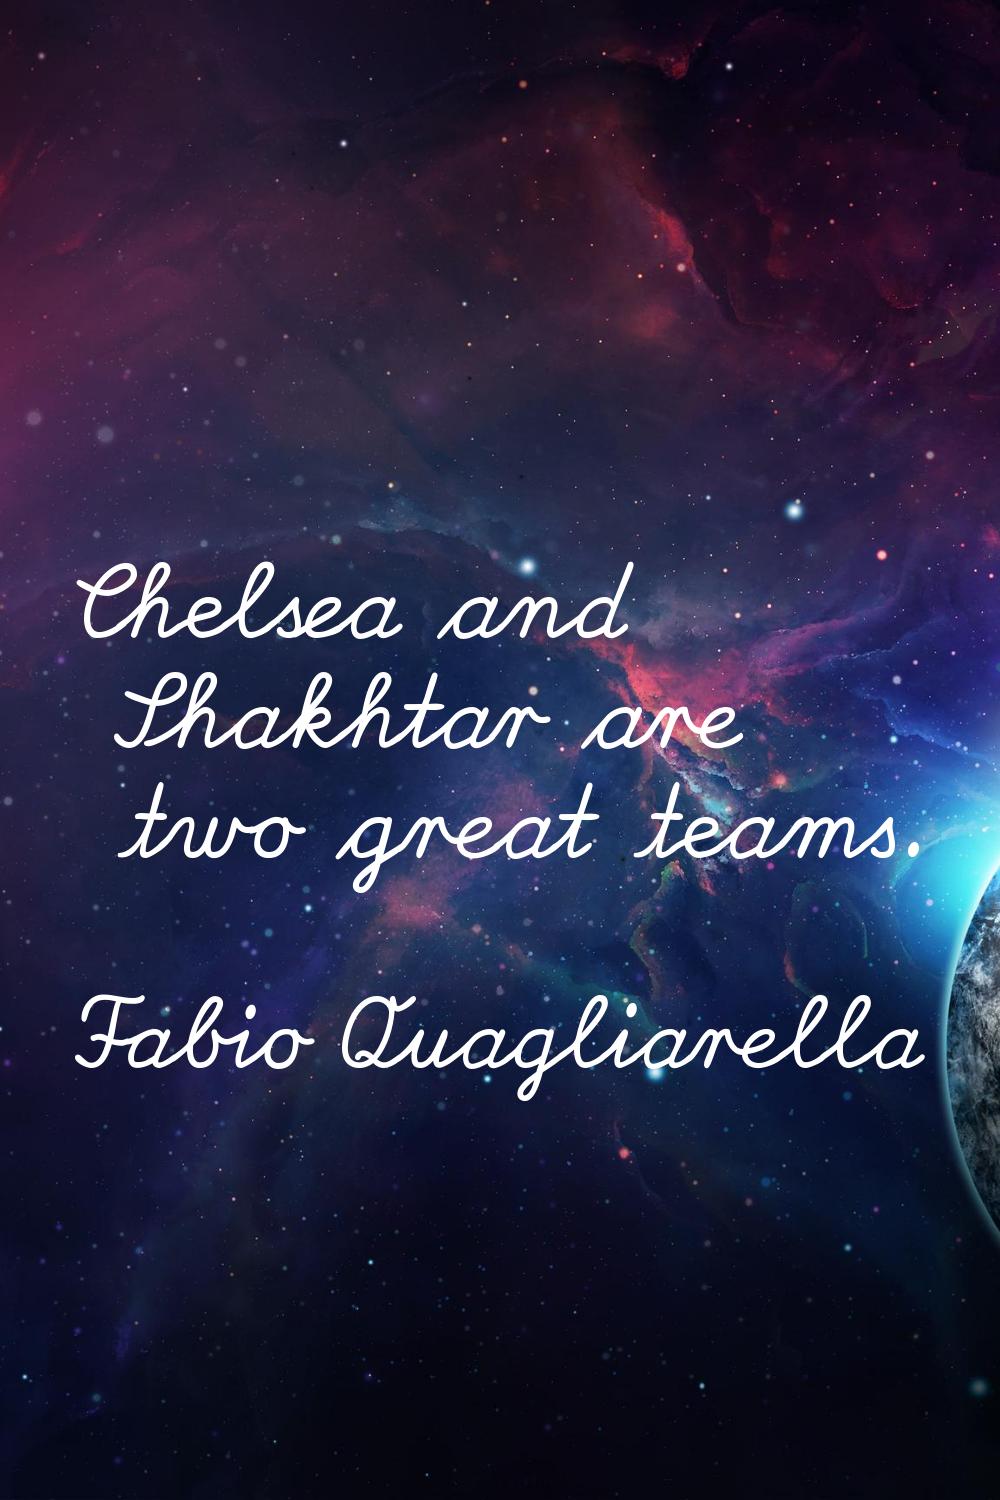 Chelsea and Shakhtar are two great teams.